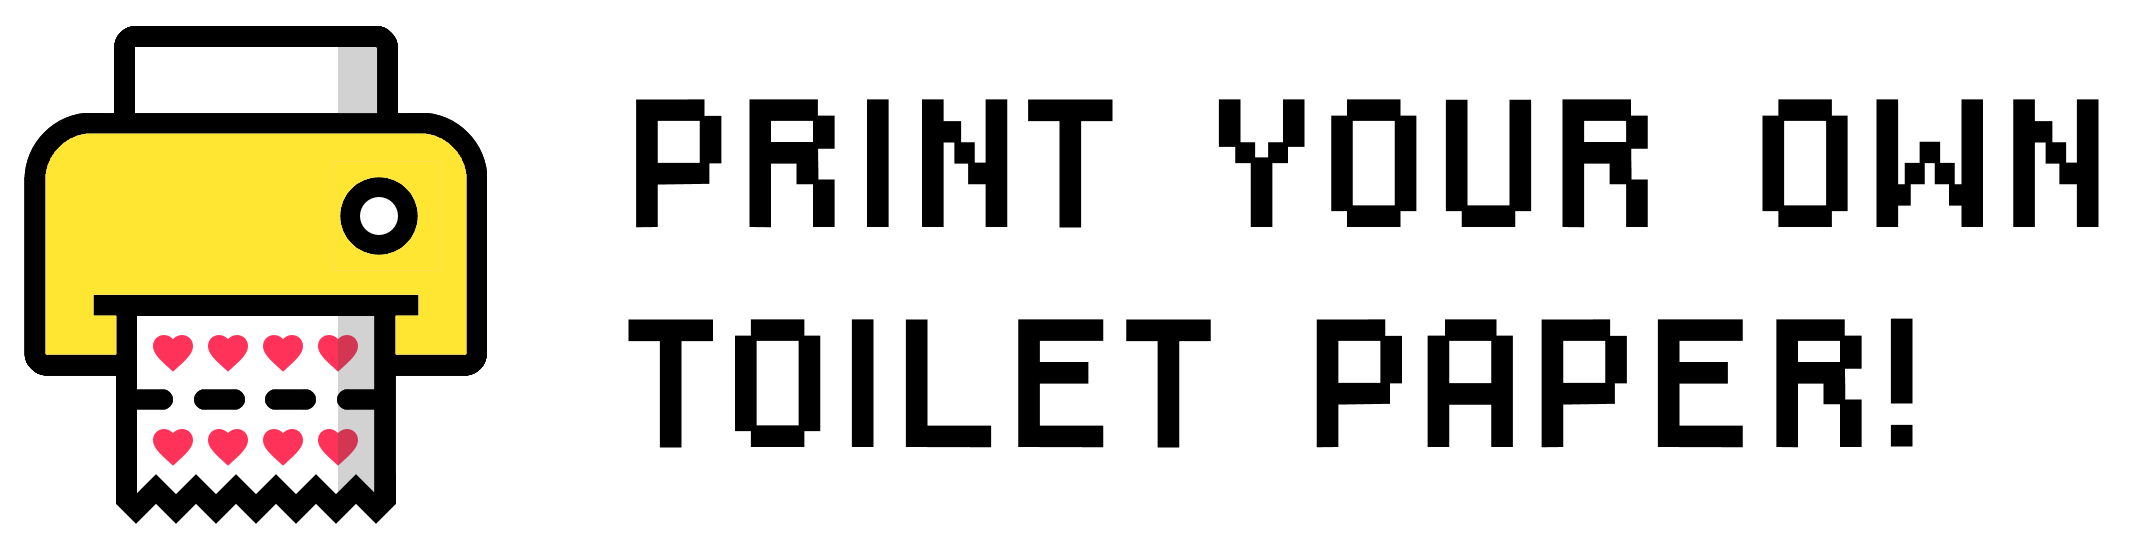 Print Your Own Toilet Paper!